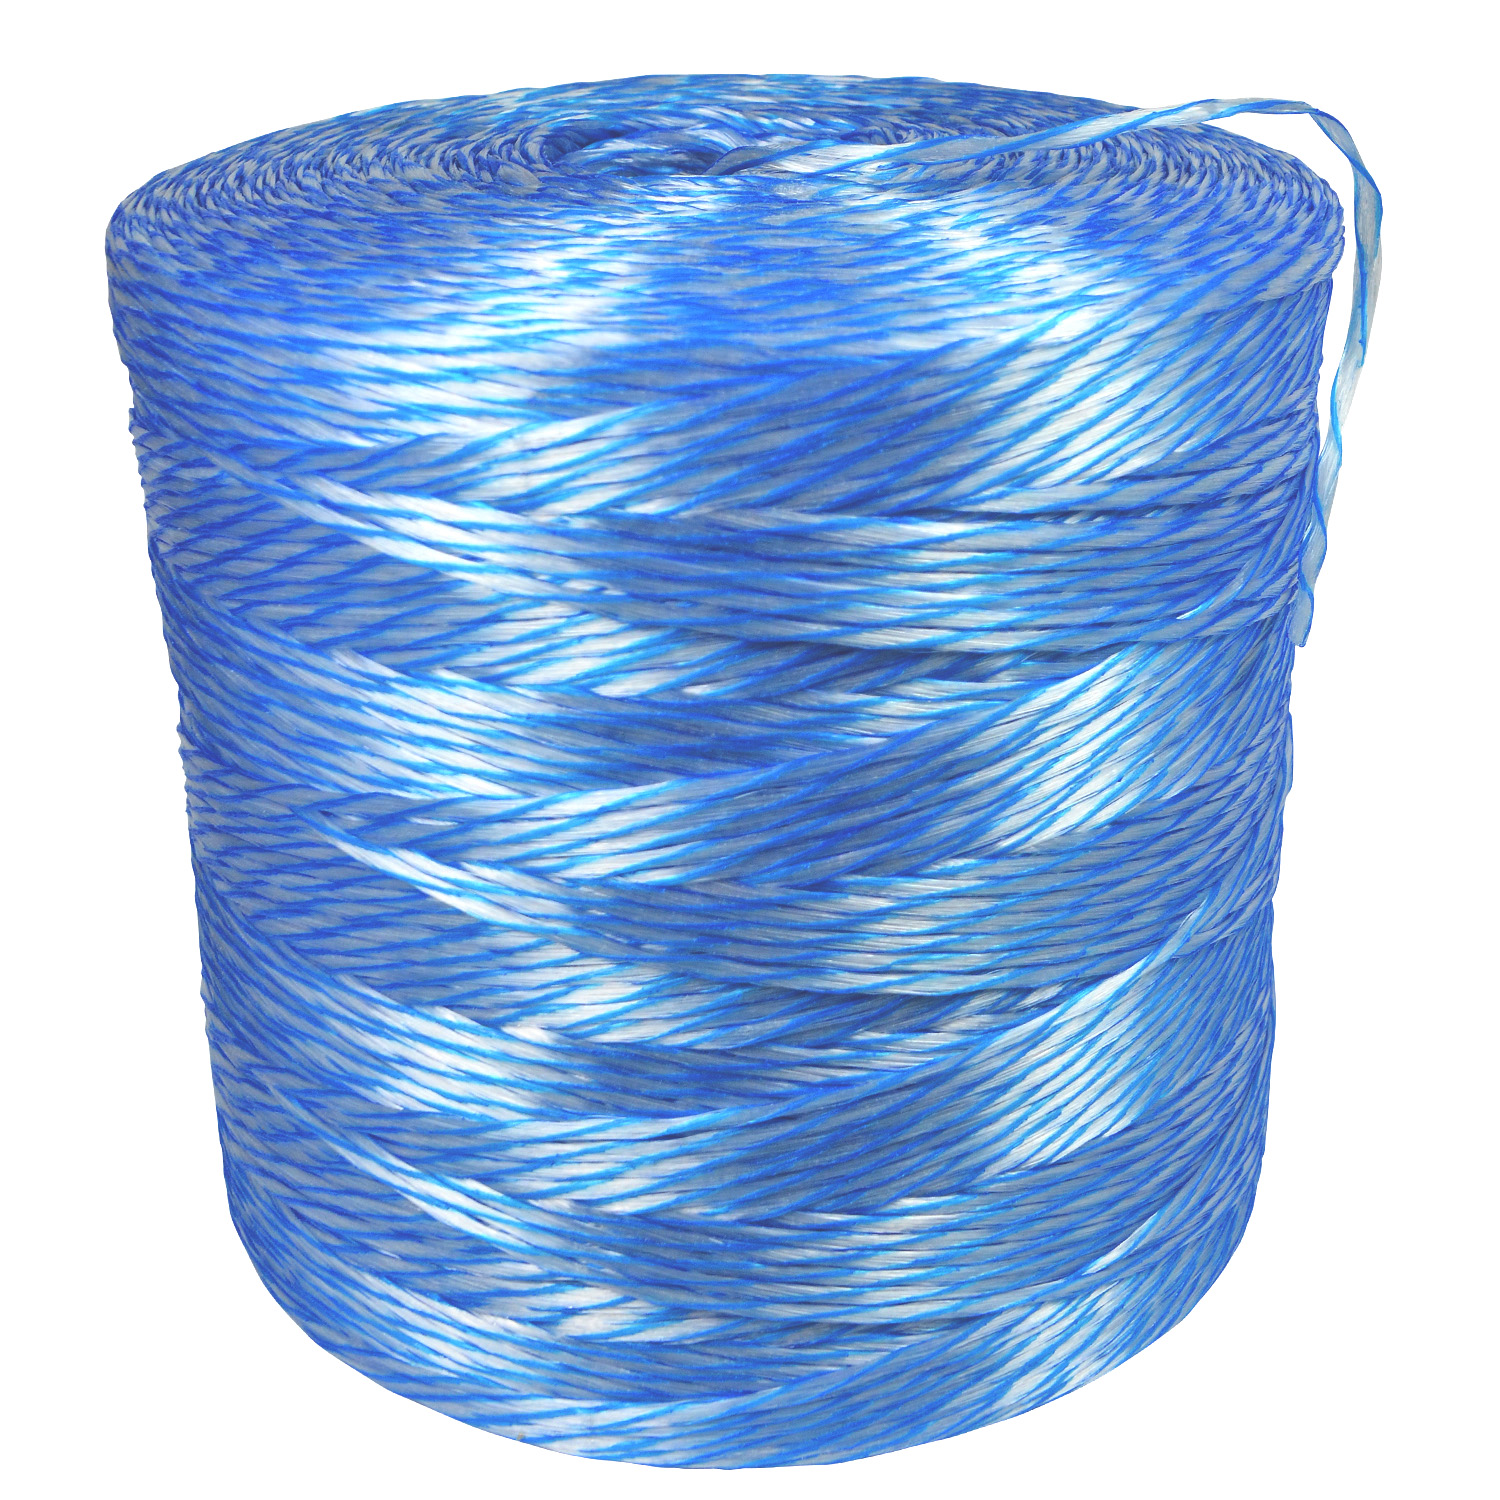 Southwire PL6500 6500 ft 210 lbs. Tensile Strength Poly Line